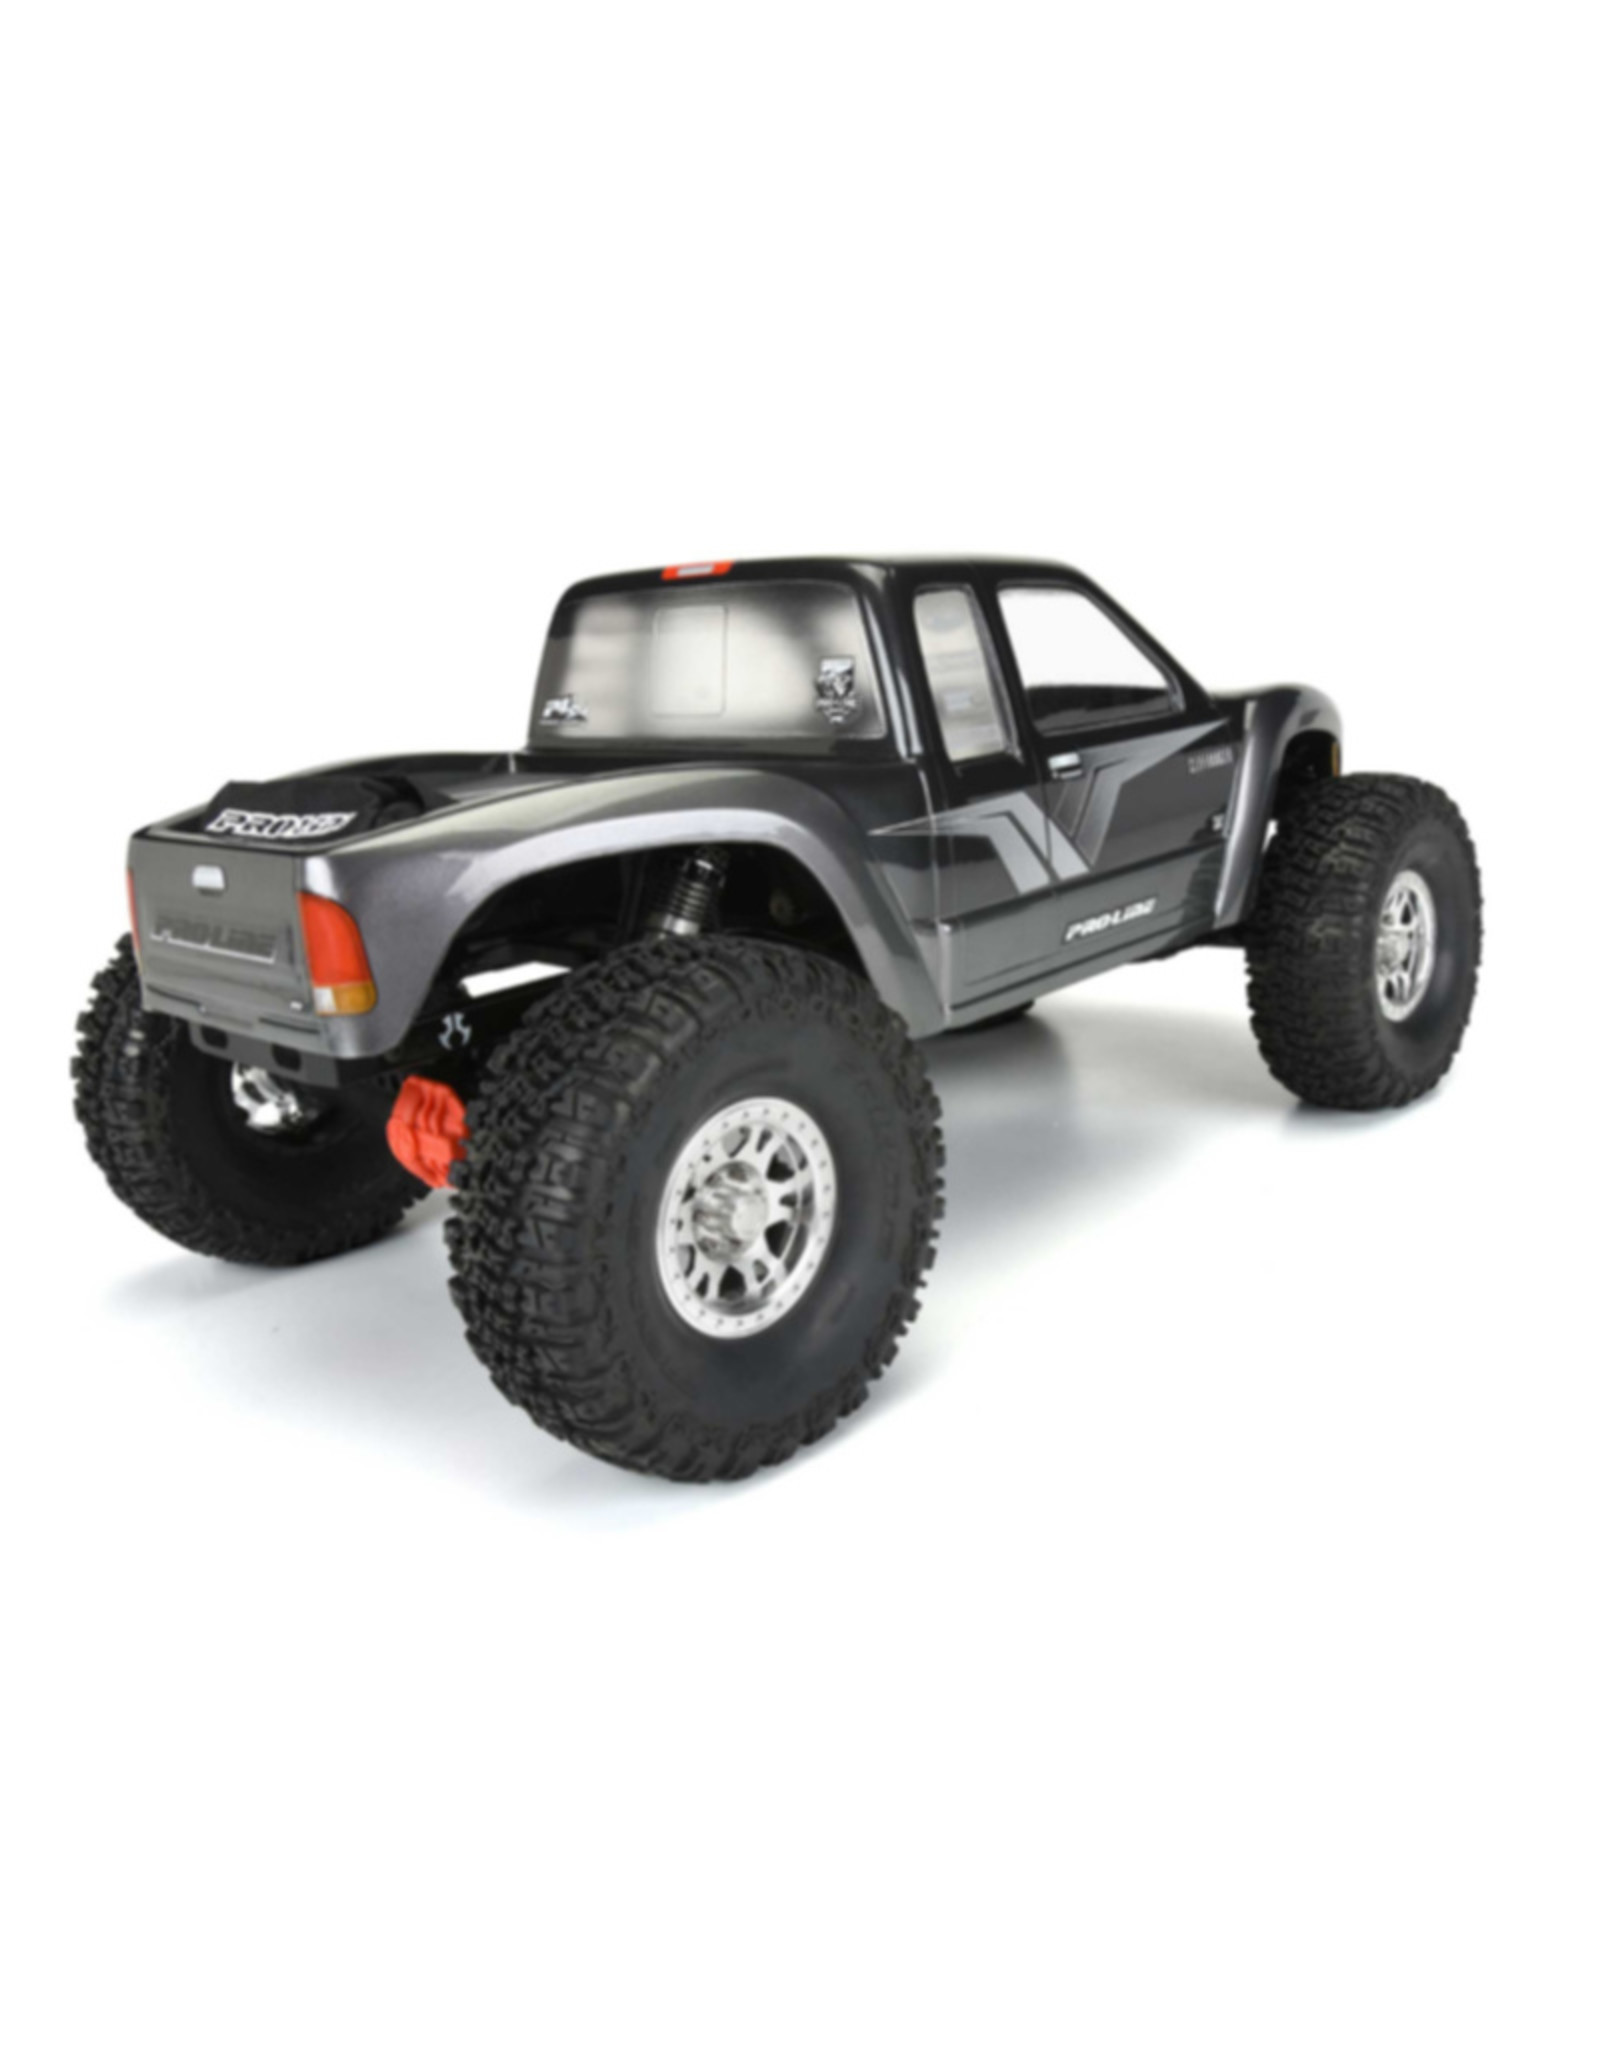 Pro-Line Racing PRO356600		Cliffhanger HP Clr Bdy 12.3" (313mm) WB Crawlers